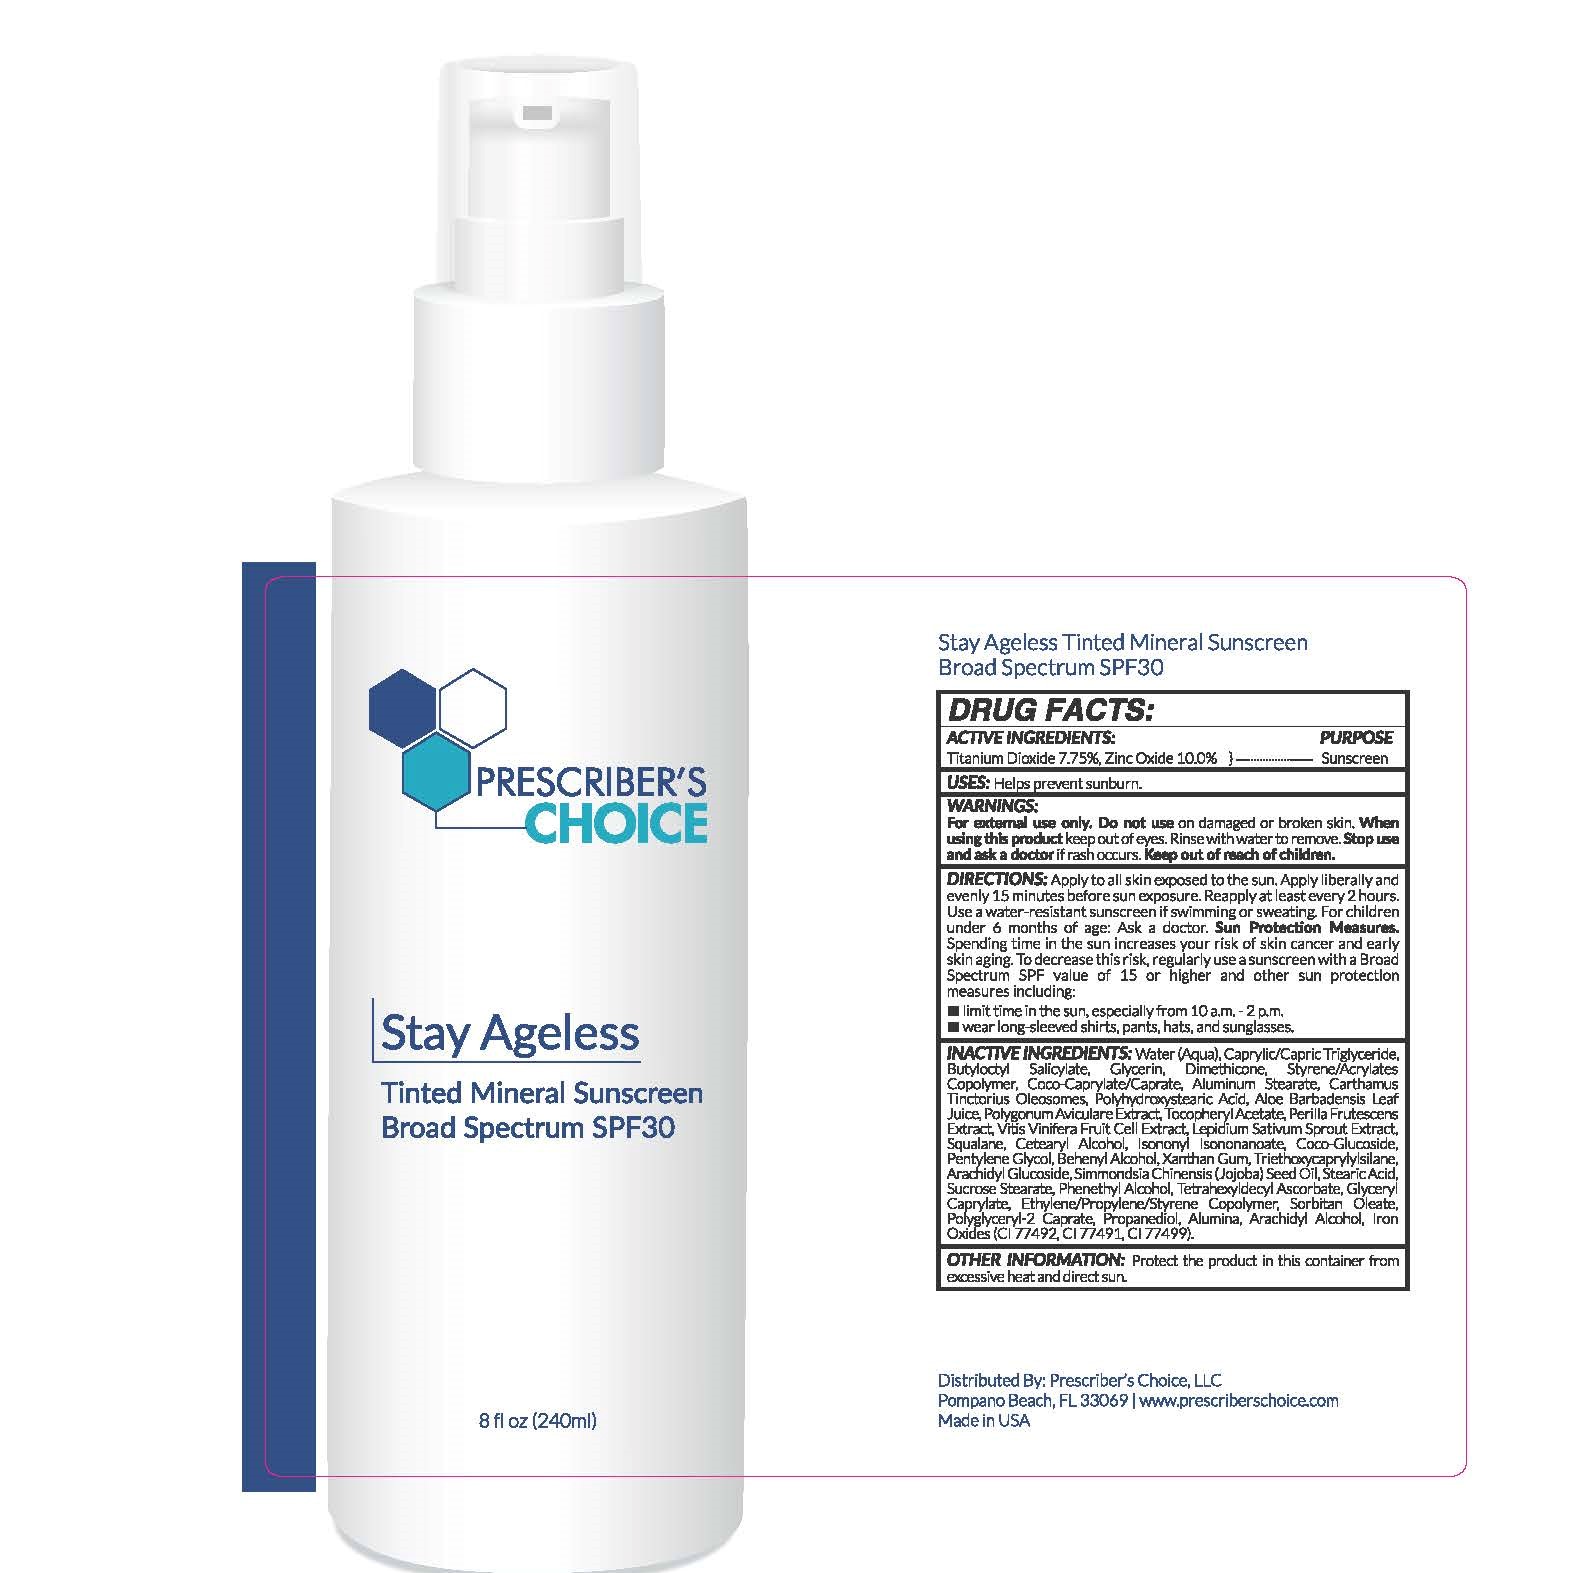 Stay Ageless Tinted Mineral Sunscreen Broad Spectrum SPF 30